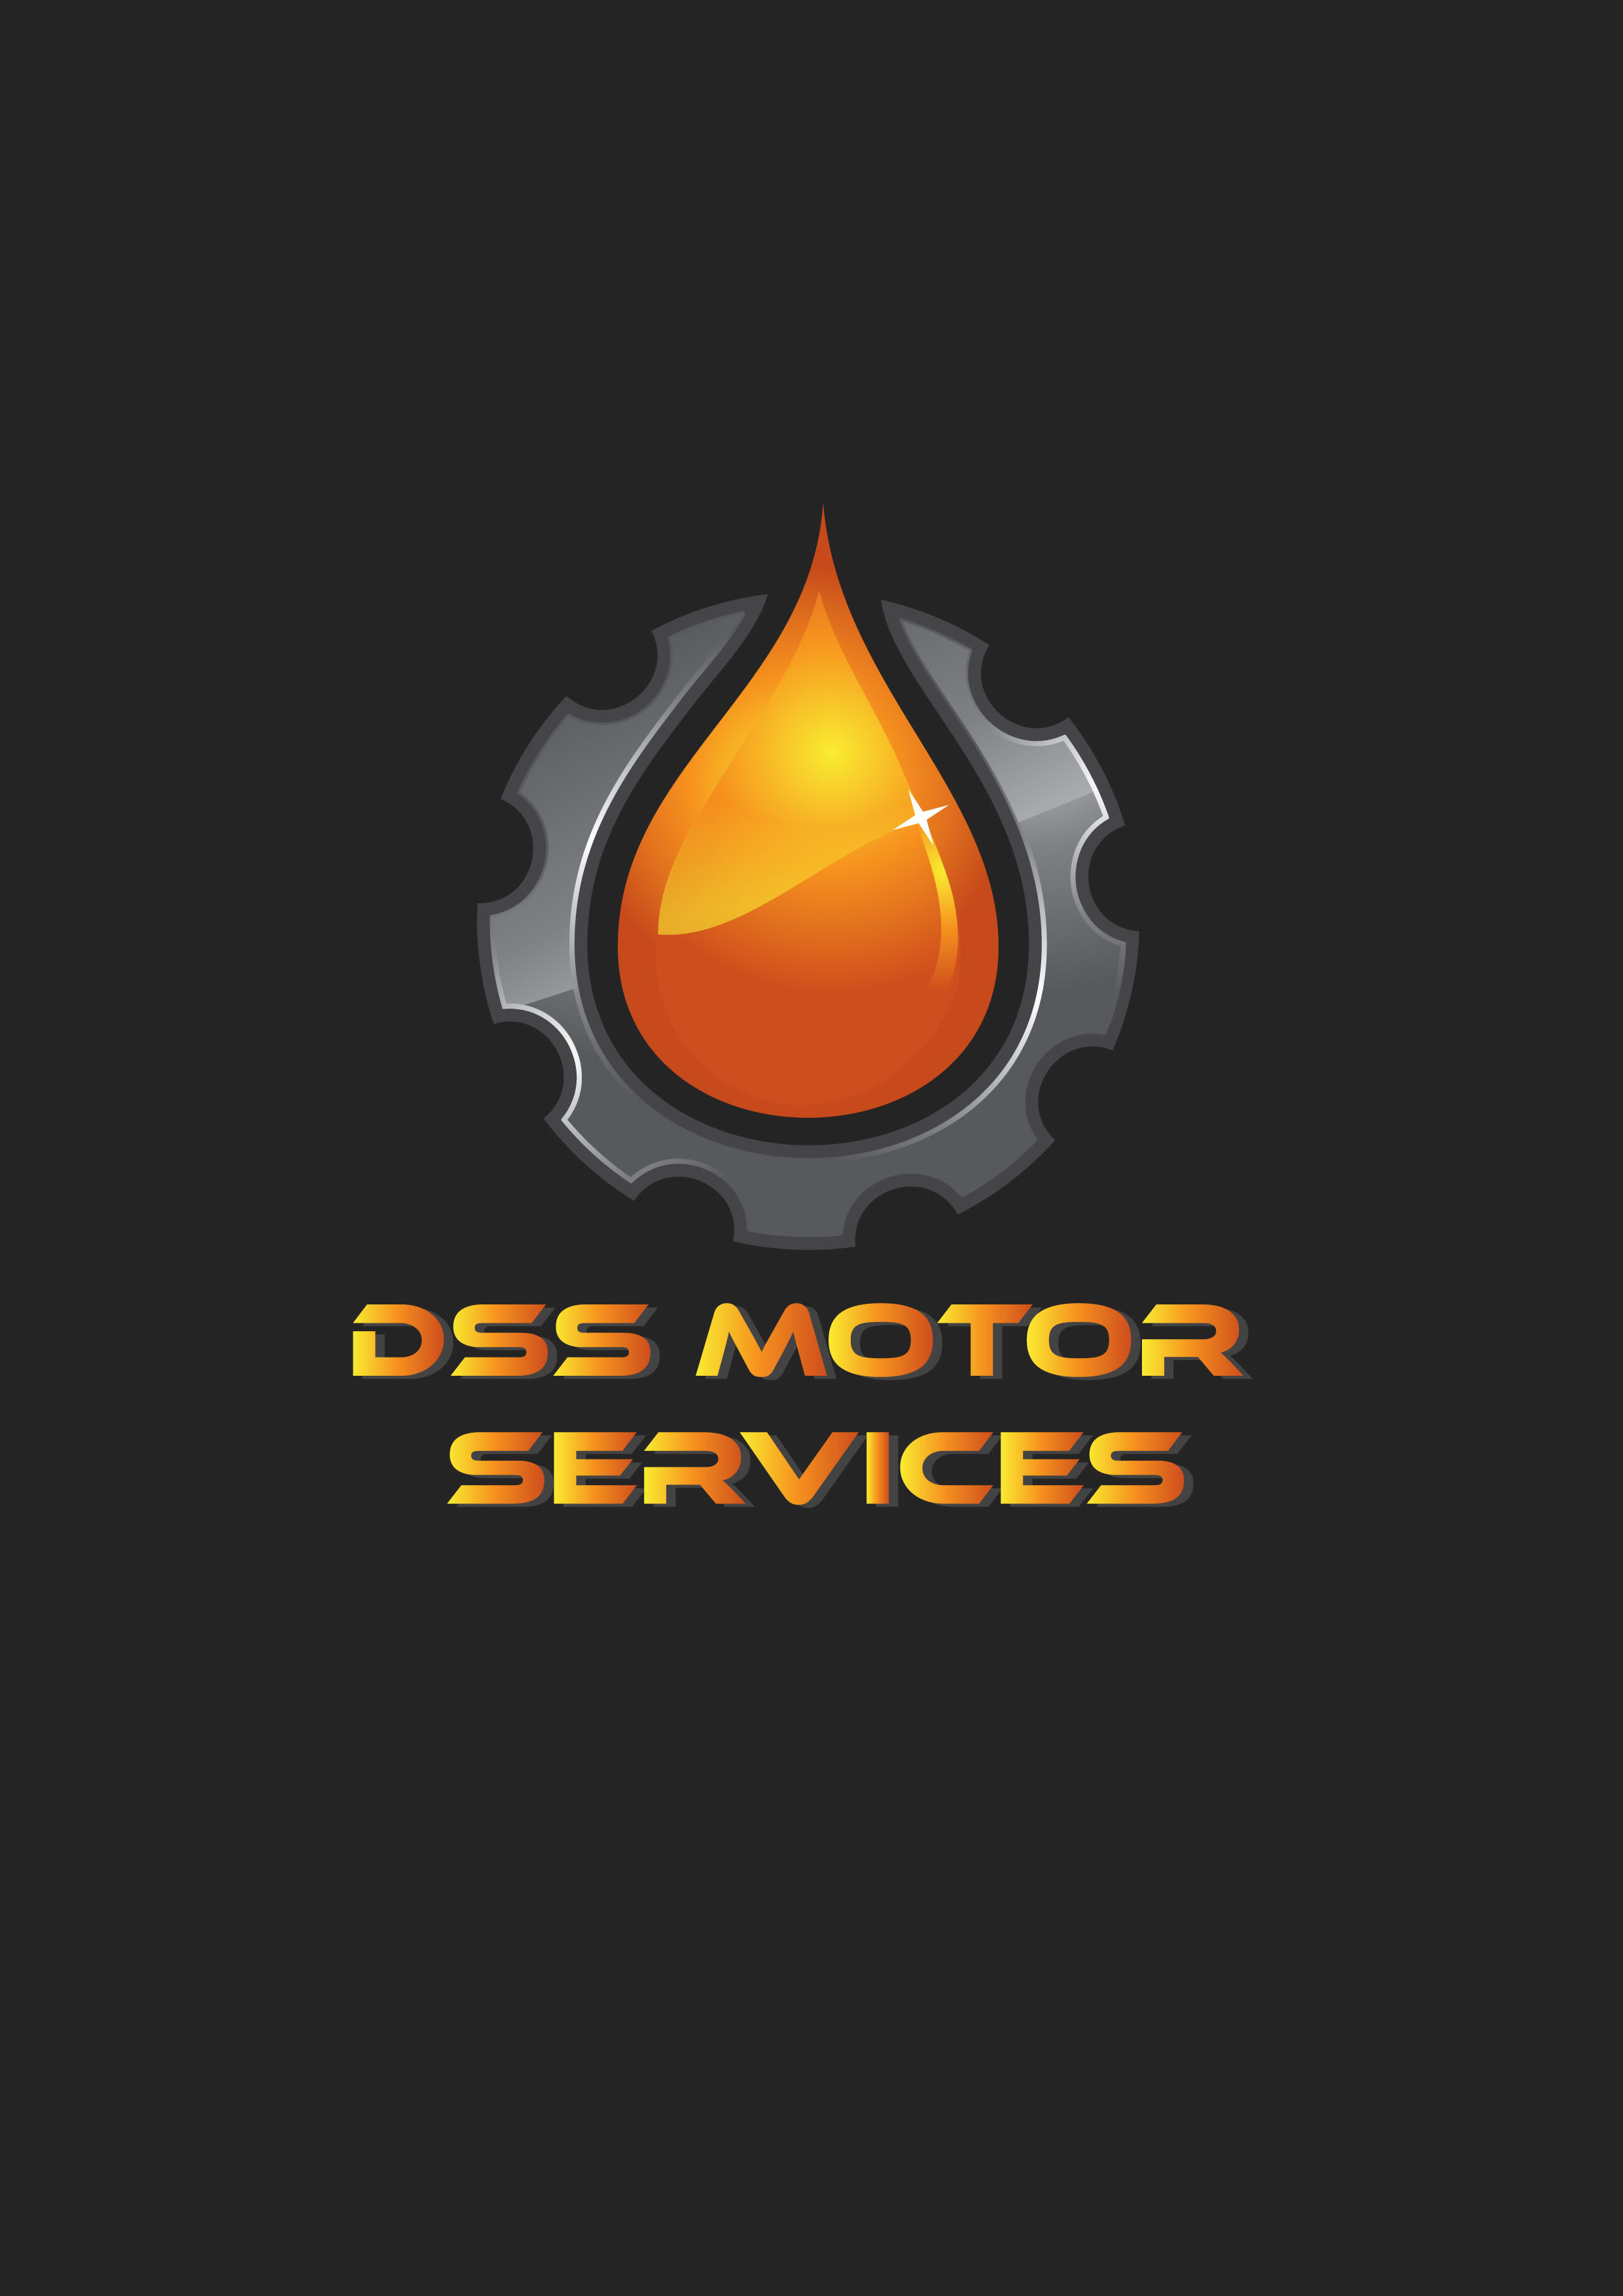 DSS Motor Services